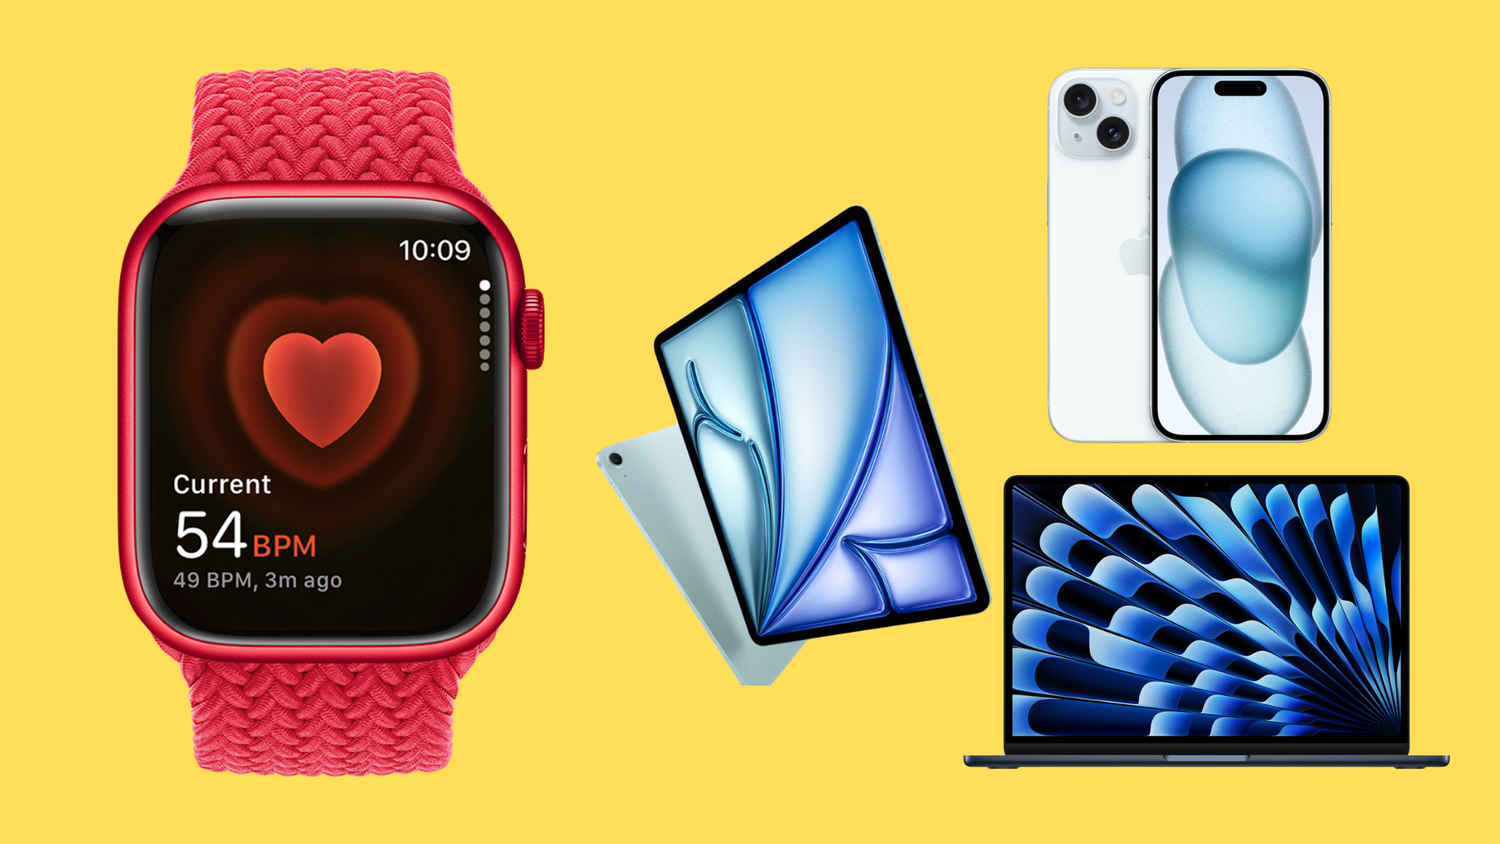 iPhones, Macs and other Apple devices may unlock with your heartbeat in future